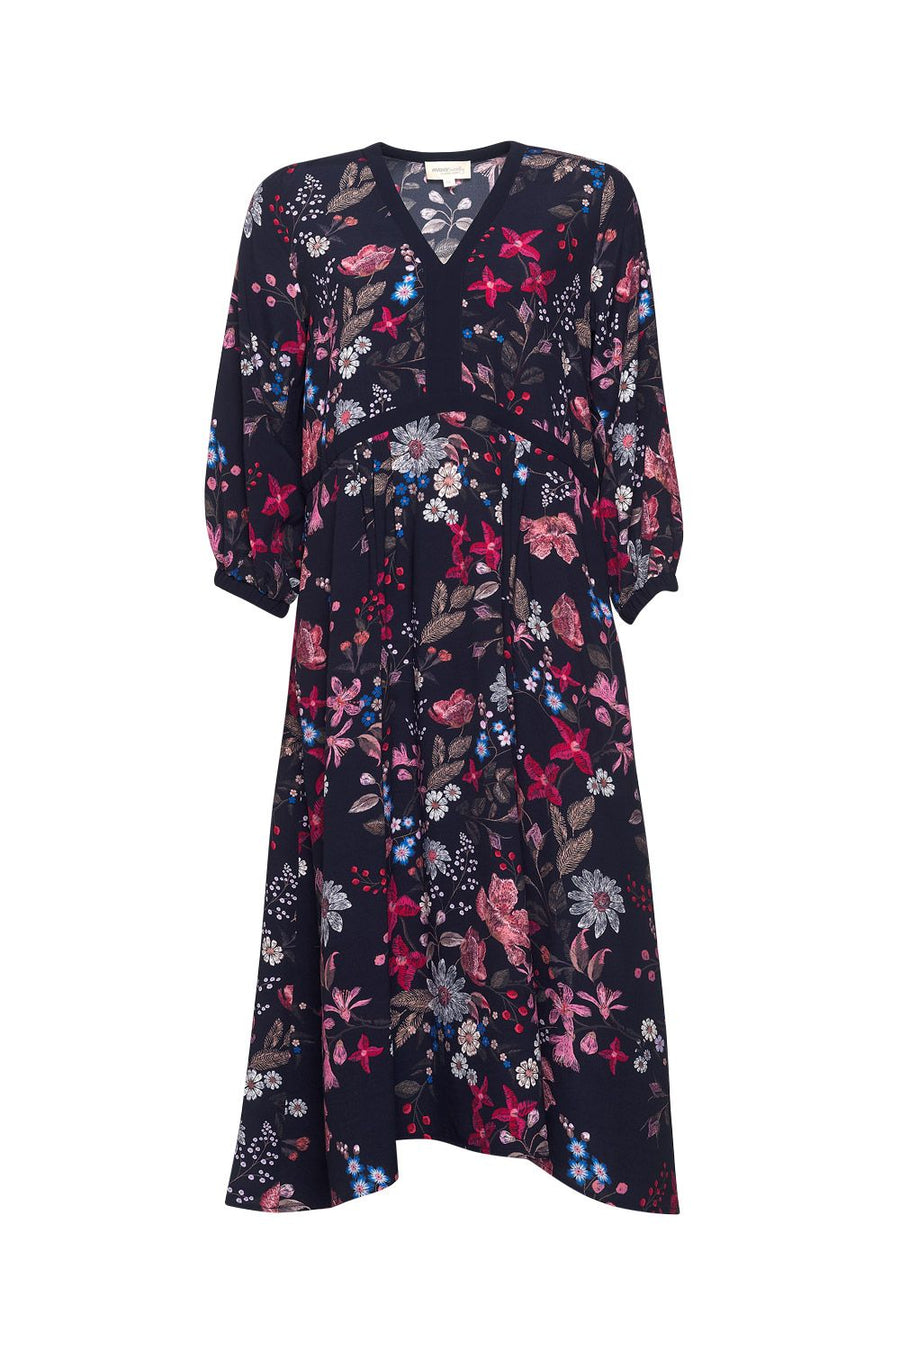 Lovely Midi Dress by Madly Sweetly